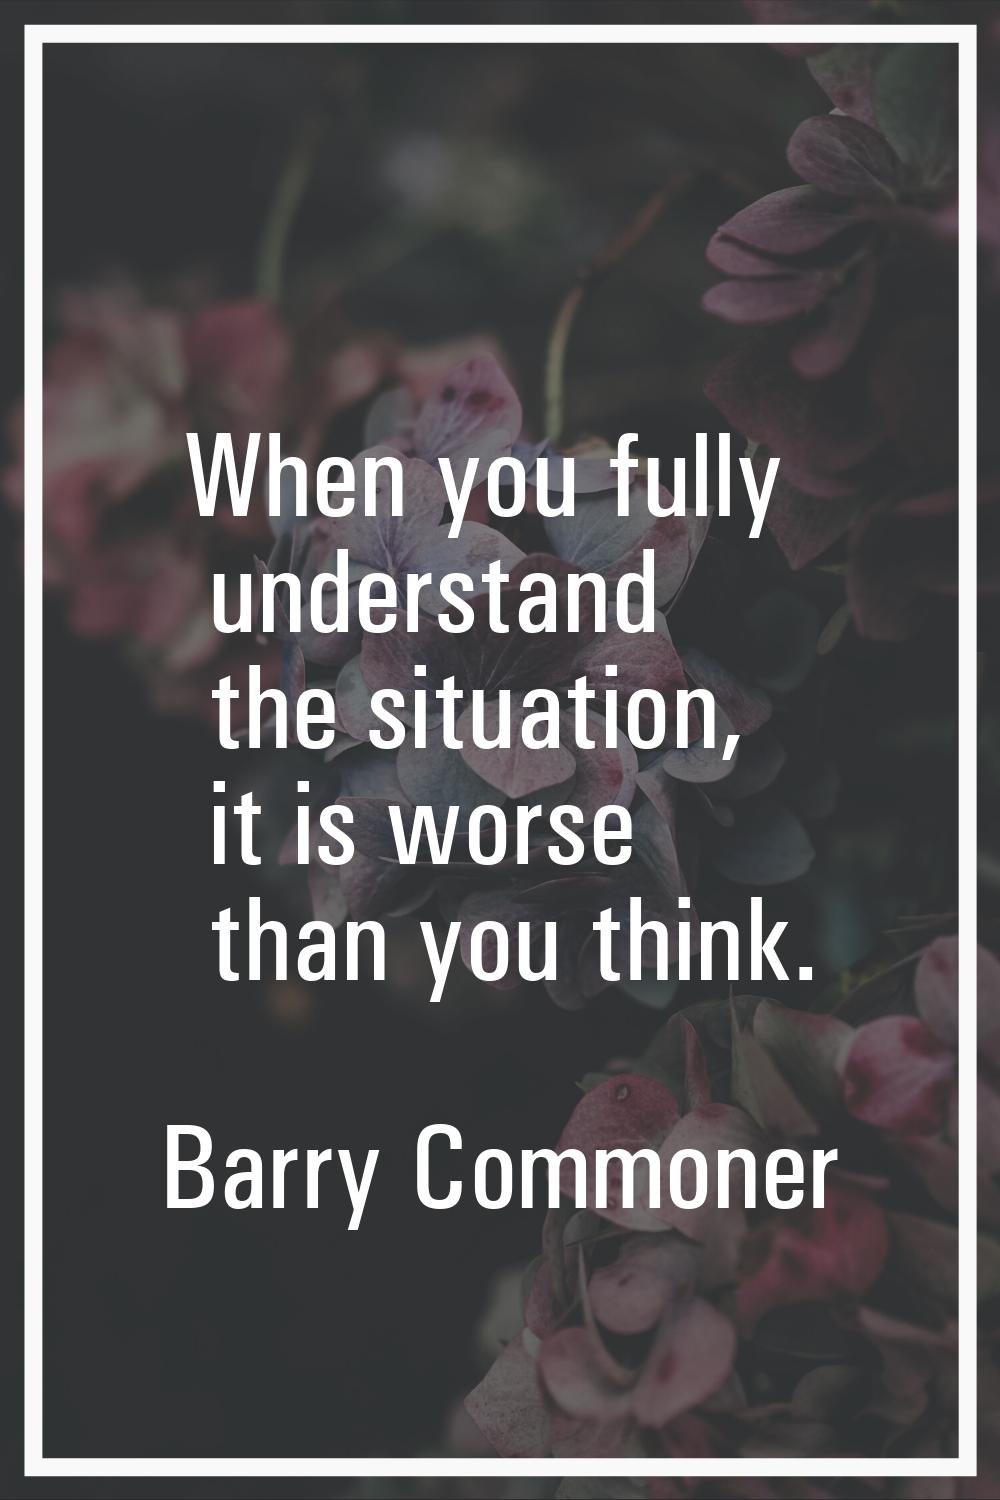 When you fully understand the situation, it is worse than you think.